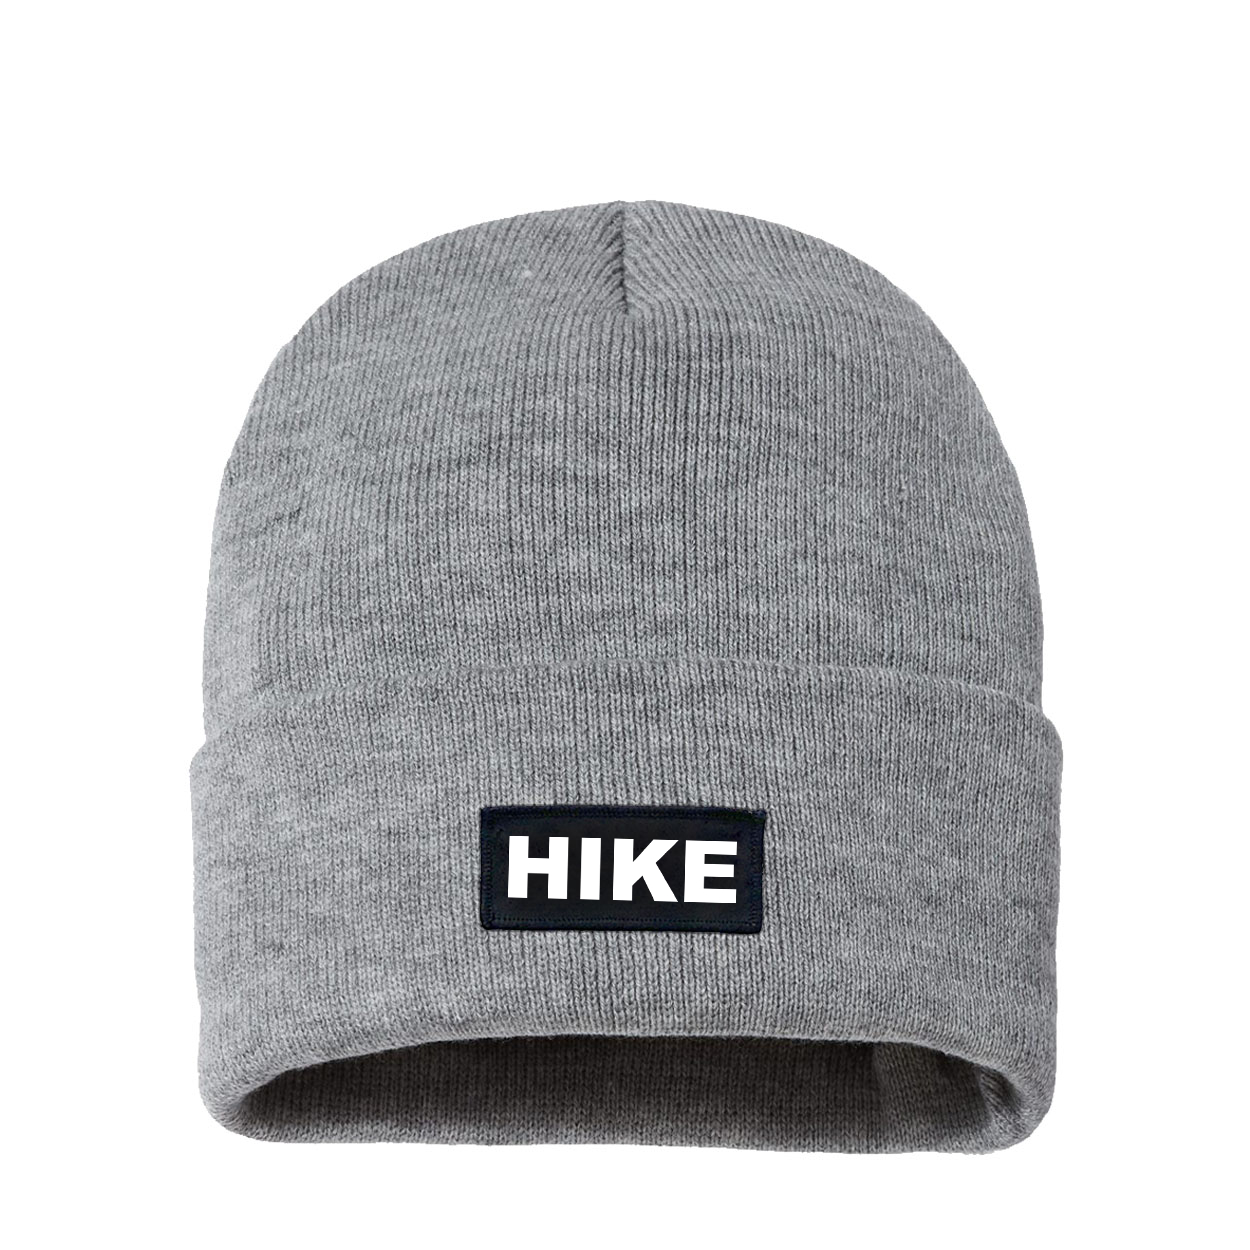 Hike Brand Logo Night Out Woven Patch Sherpa Lined Cuffed Beanie Heather Gray